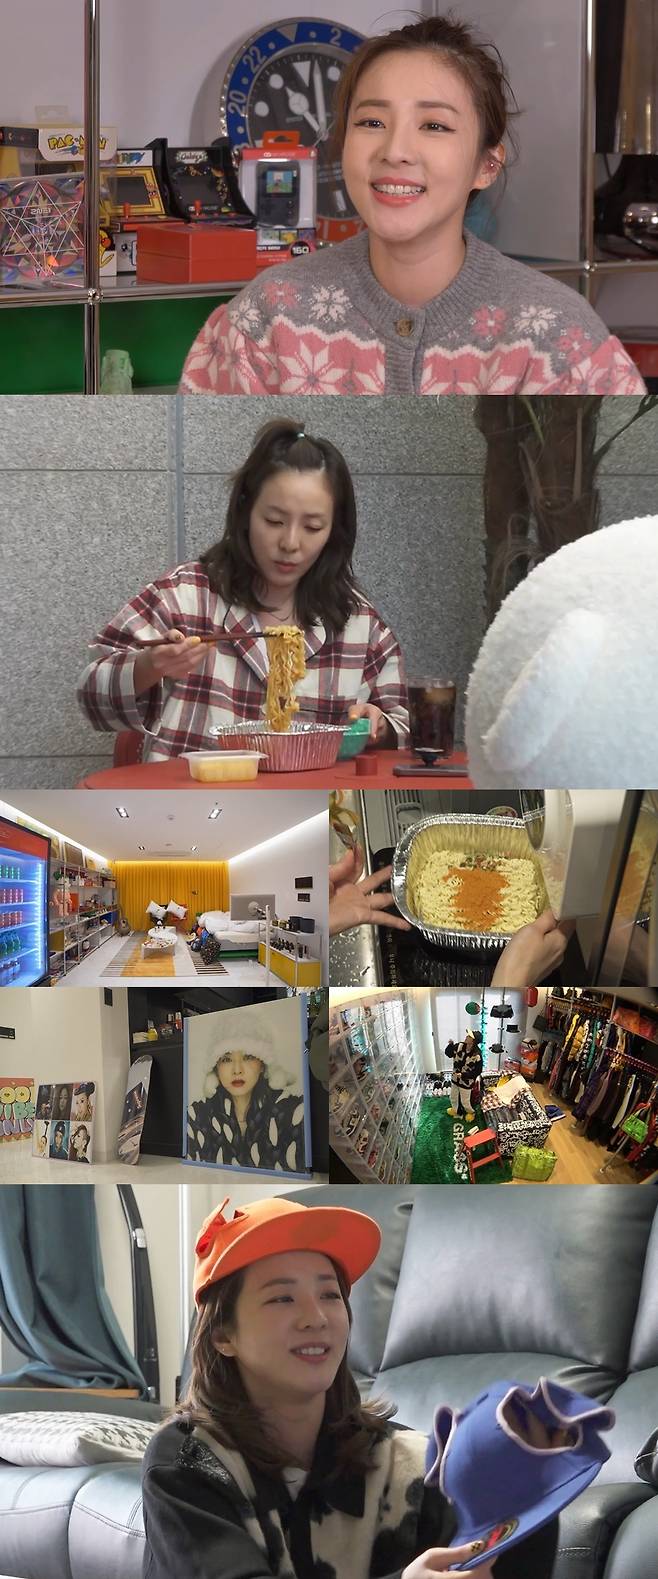 MBC entertainment program I Live Alone (director Huh Hang Kim Ji-woo), which will be broadcast on the 26th, will reveal the day of Sandara Park, a newbie for the first month of The Trace.Sandara Park is surprised to find that I have been independent in 38 years and I am a dream I Live Alone for me because I have been living with my parents all the time after the living with the members during the 2NE1 activity.Sandara Park said, I lived the life of a K-old woman before.I started my departure from last year, he said, but he is curious about why he has a desire for independence late.Sandara Park is thirsty for independence, so the Interiors concept is also deviated.Sandara Park boasts a collection filled with one side of the living room wall, as well as a dress room with pupil extensions, which is a sense restaurant down interiors.Here, the refrigerator, kitchen, even the corridor, is decorated with Sandara Park photographs, causing laughter with Interiors that reminds me of Jun Hyun-moos narcissistic house.In addition, Han River ramen machine, which does not match the sense restaurant house, takes the kitchen spot and steals the gaze.Han River Ramen Machine is the roman item that Sandara Park wanted for the first time when it was independent.Sandara Park, famous for its news, is curious to say that she has played the food of the gourmet scale as if she had regained her appetite for 38 years with the realization of the Trace romance.Sandara Park said, I can not stand without management anymore. He also showed the end of health care, which is a dessert of black goat juice.Then, I take a bus to the village bus and go to the used transaction, and I am waiting for the broadcast that predicted the daily life that has been reversed in the reversal.